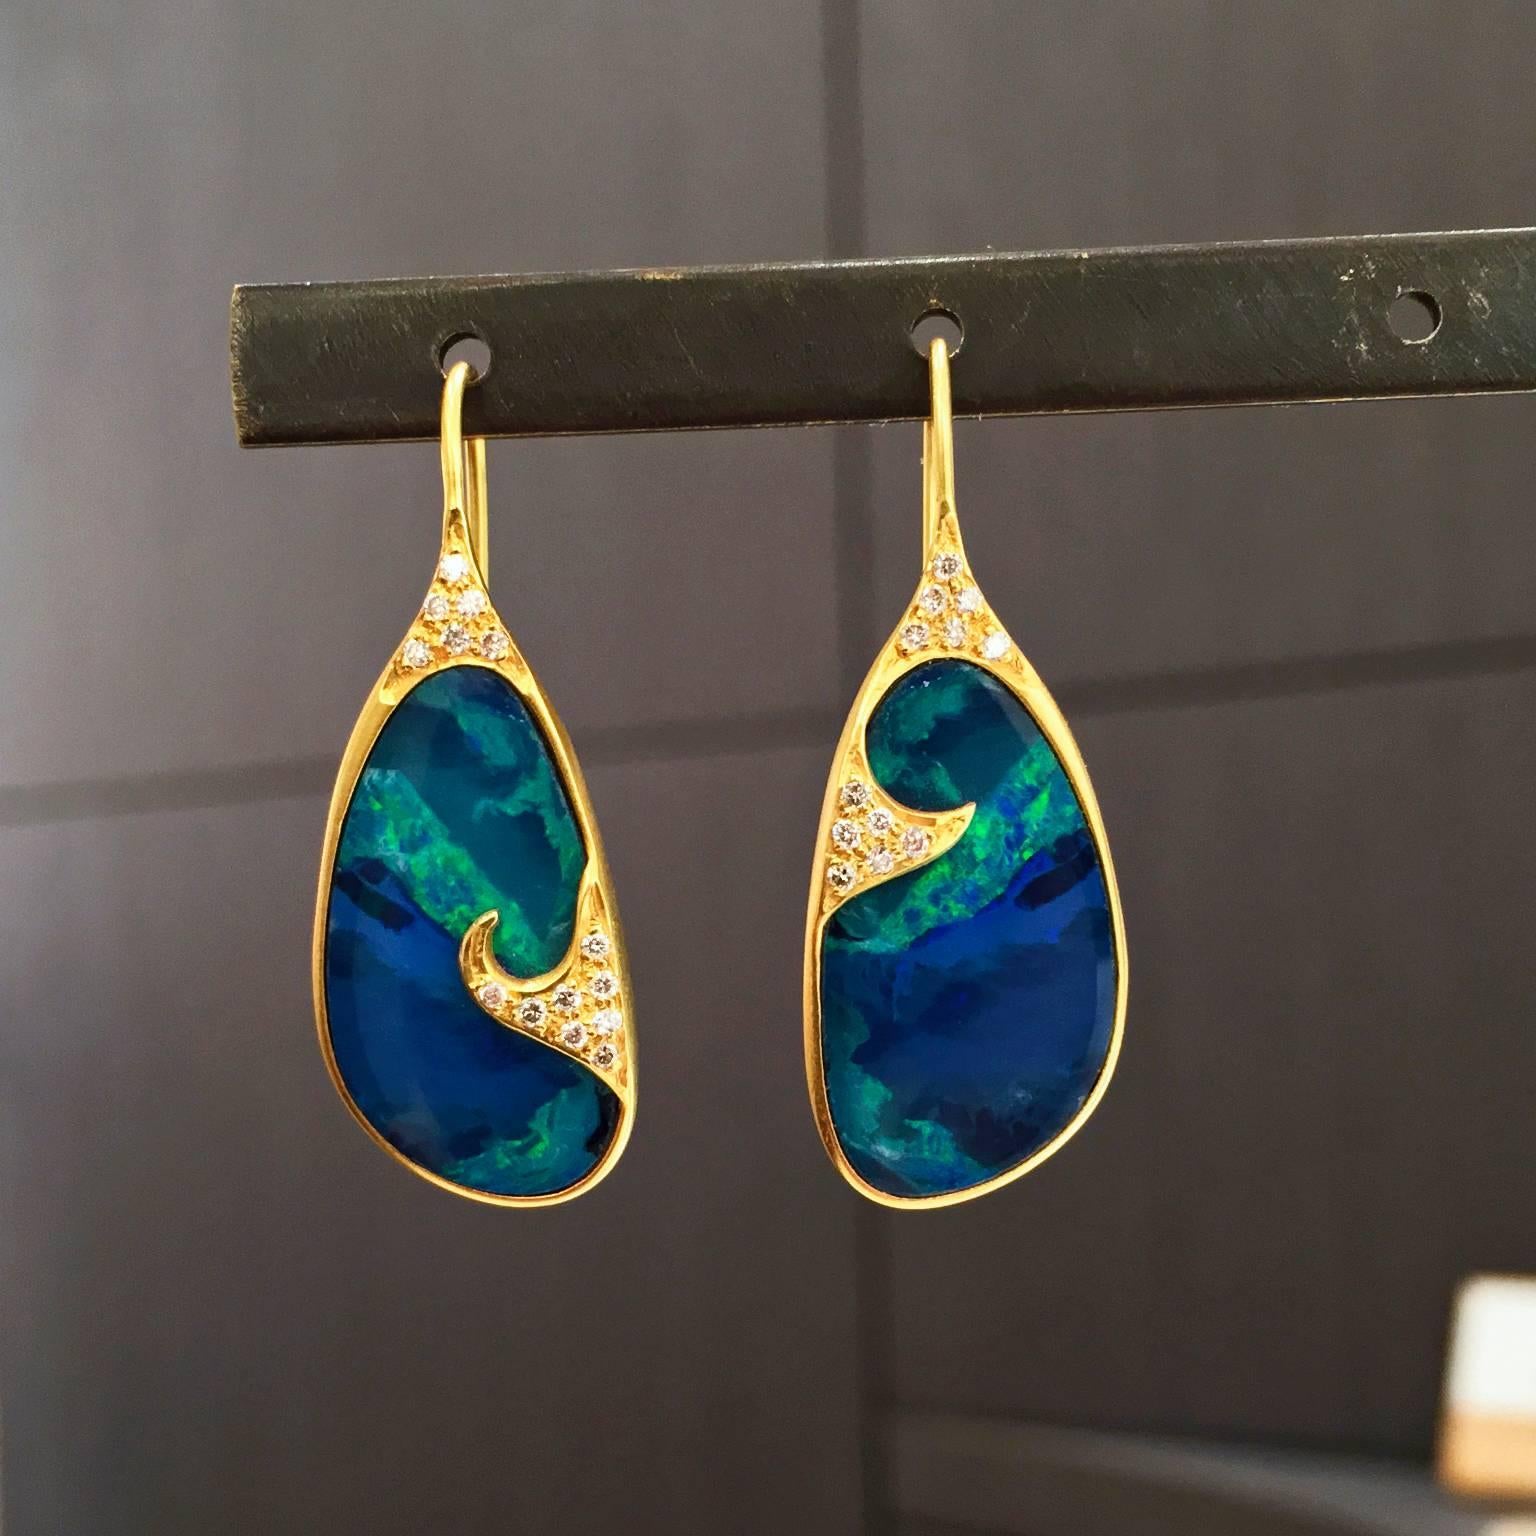 One-of-a-Kind Wave Earrings handcrafted in matte-finished 18k yellow gold showcasing two hand-cut and hand-polished boulder opal doublets displaying primarily blue and green color with flashes of orange, red, and yellow. Earrings are accented by